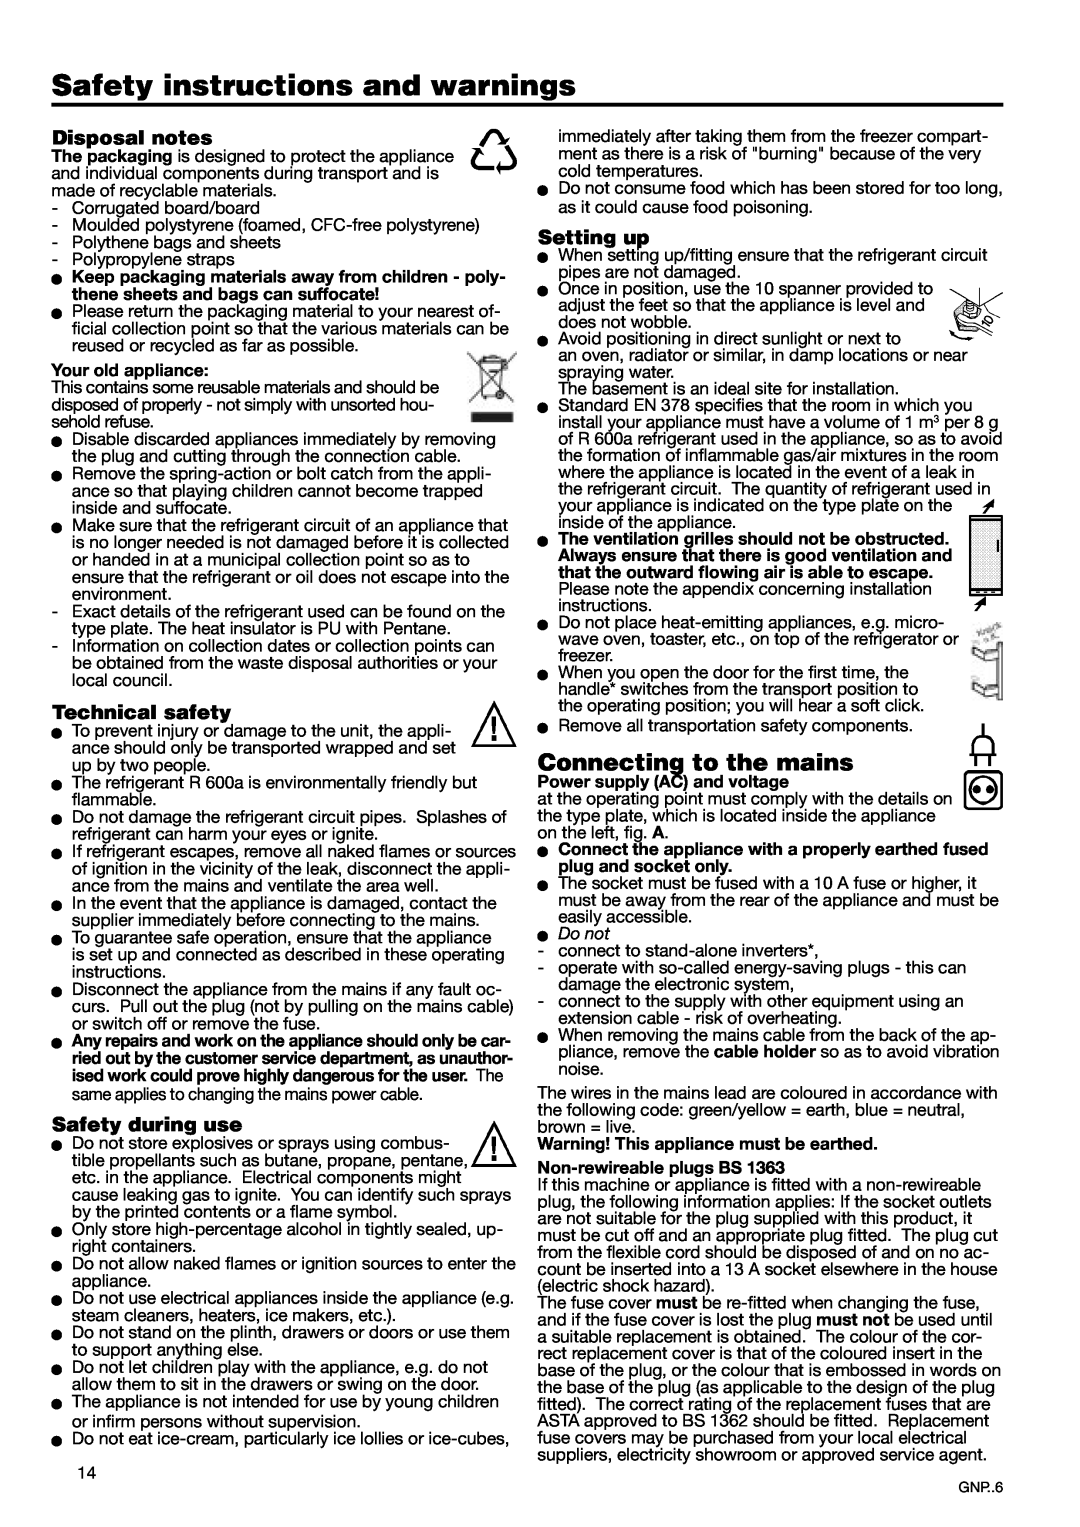 Liebherr 7082 260-00 Safety instructions and warnings, Connecting to the mains, Disposal notes, Technical safety, WDo not 